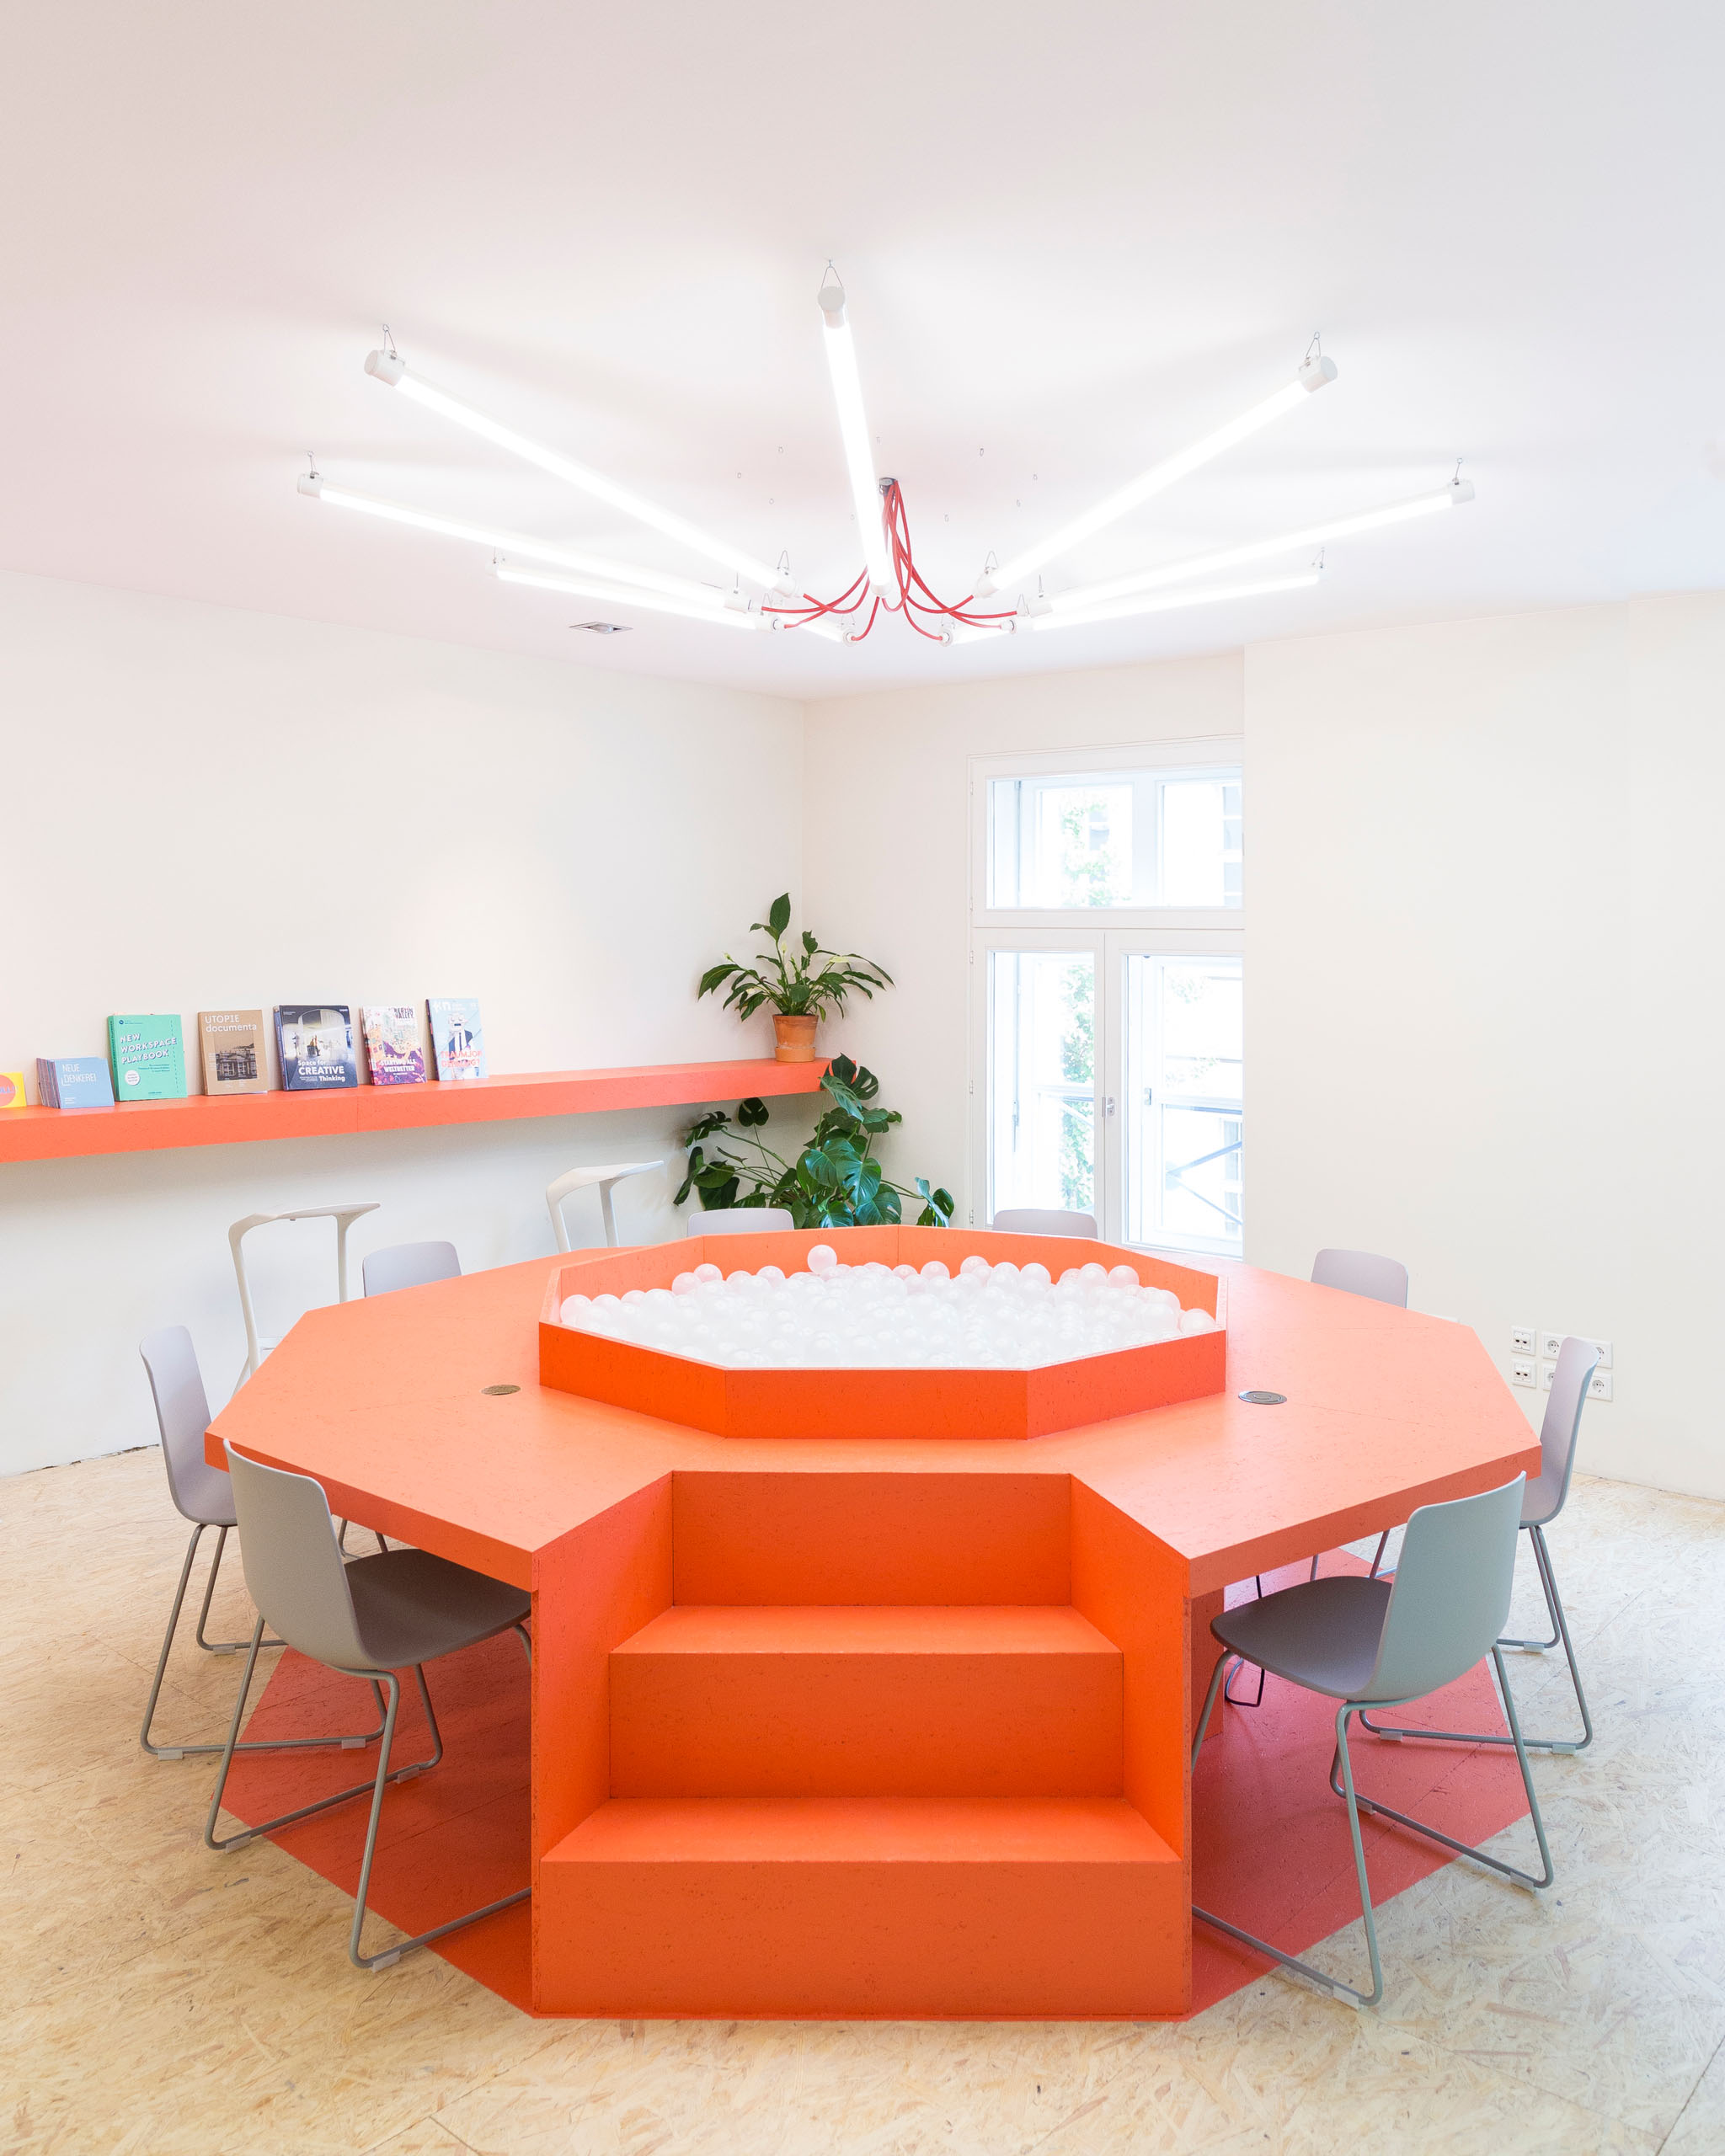 The interior of the Neue Denkerei coworking space. In the middle of the room there is a big bright orange desk.